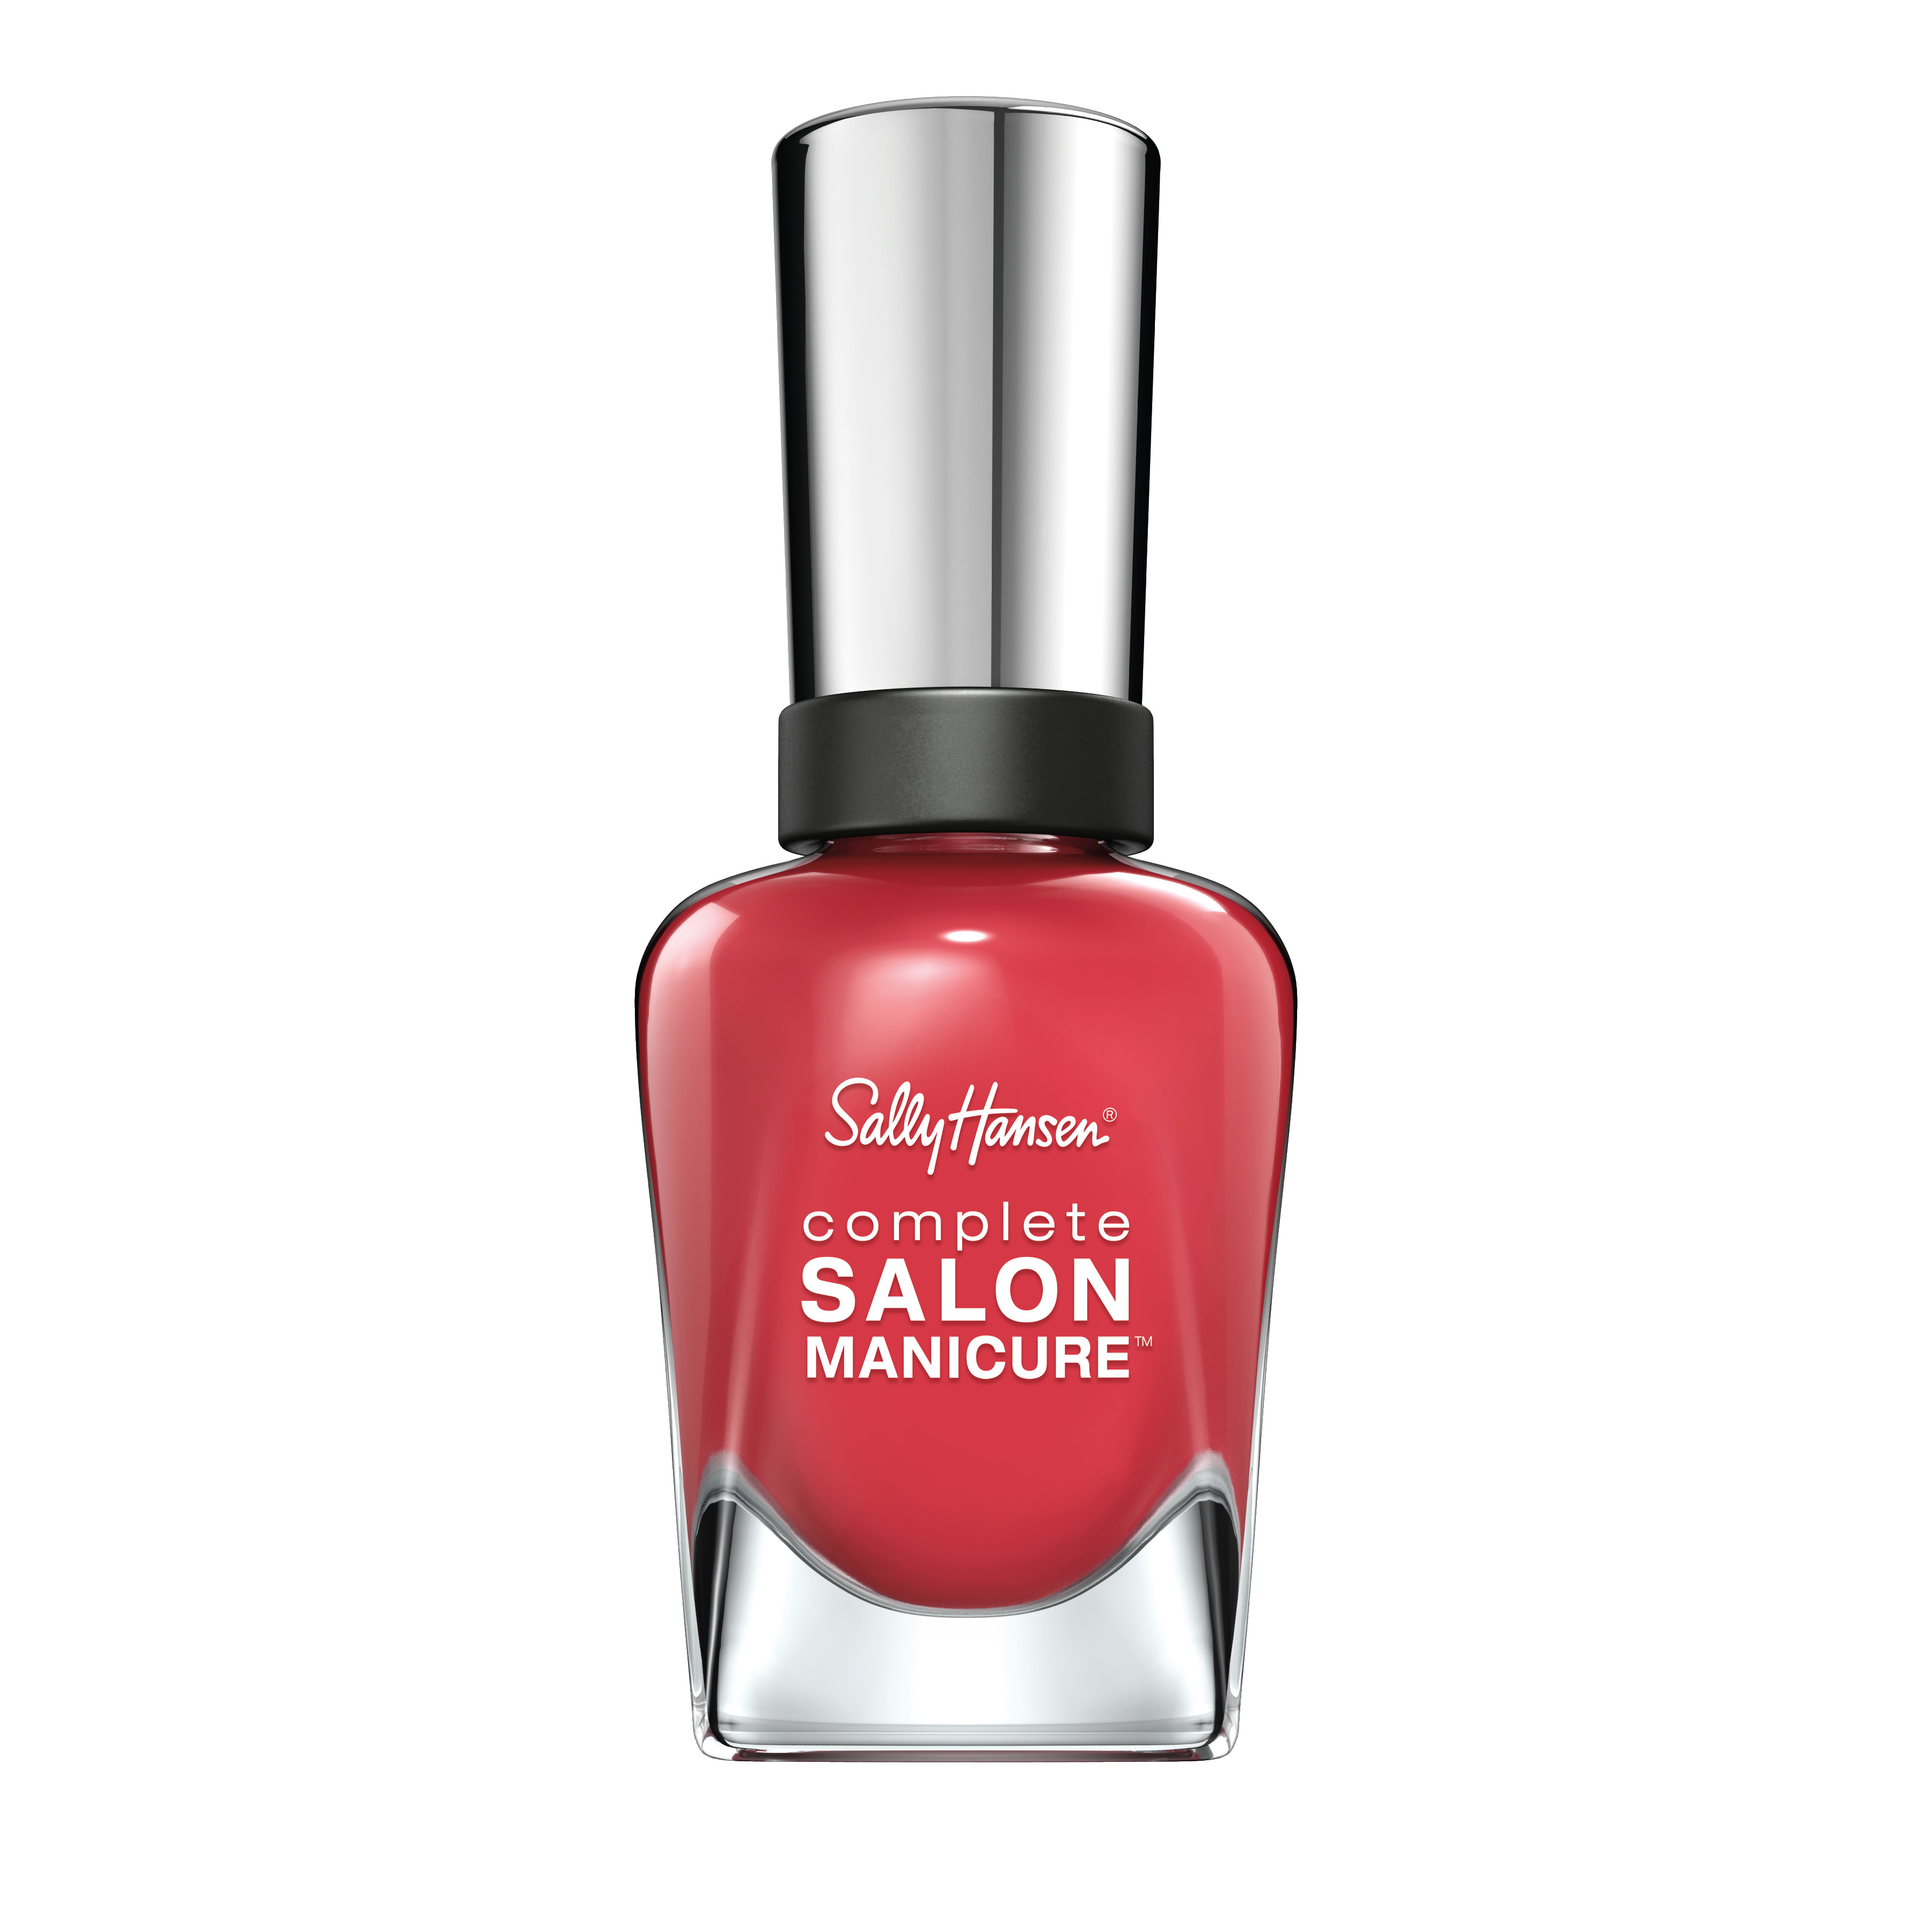 Sally Hansen Complete Salon Manicure Nail Color, Scarlet Lacquer - image 1 of 3